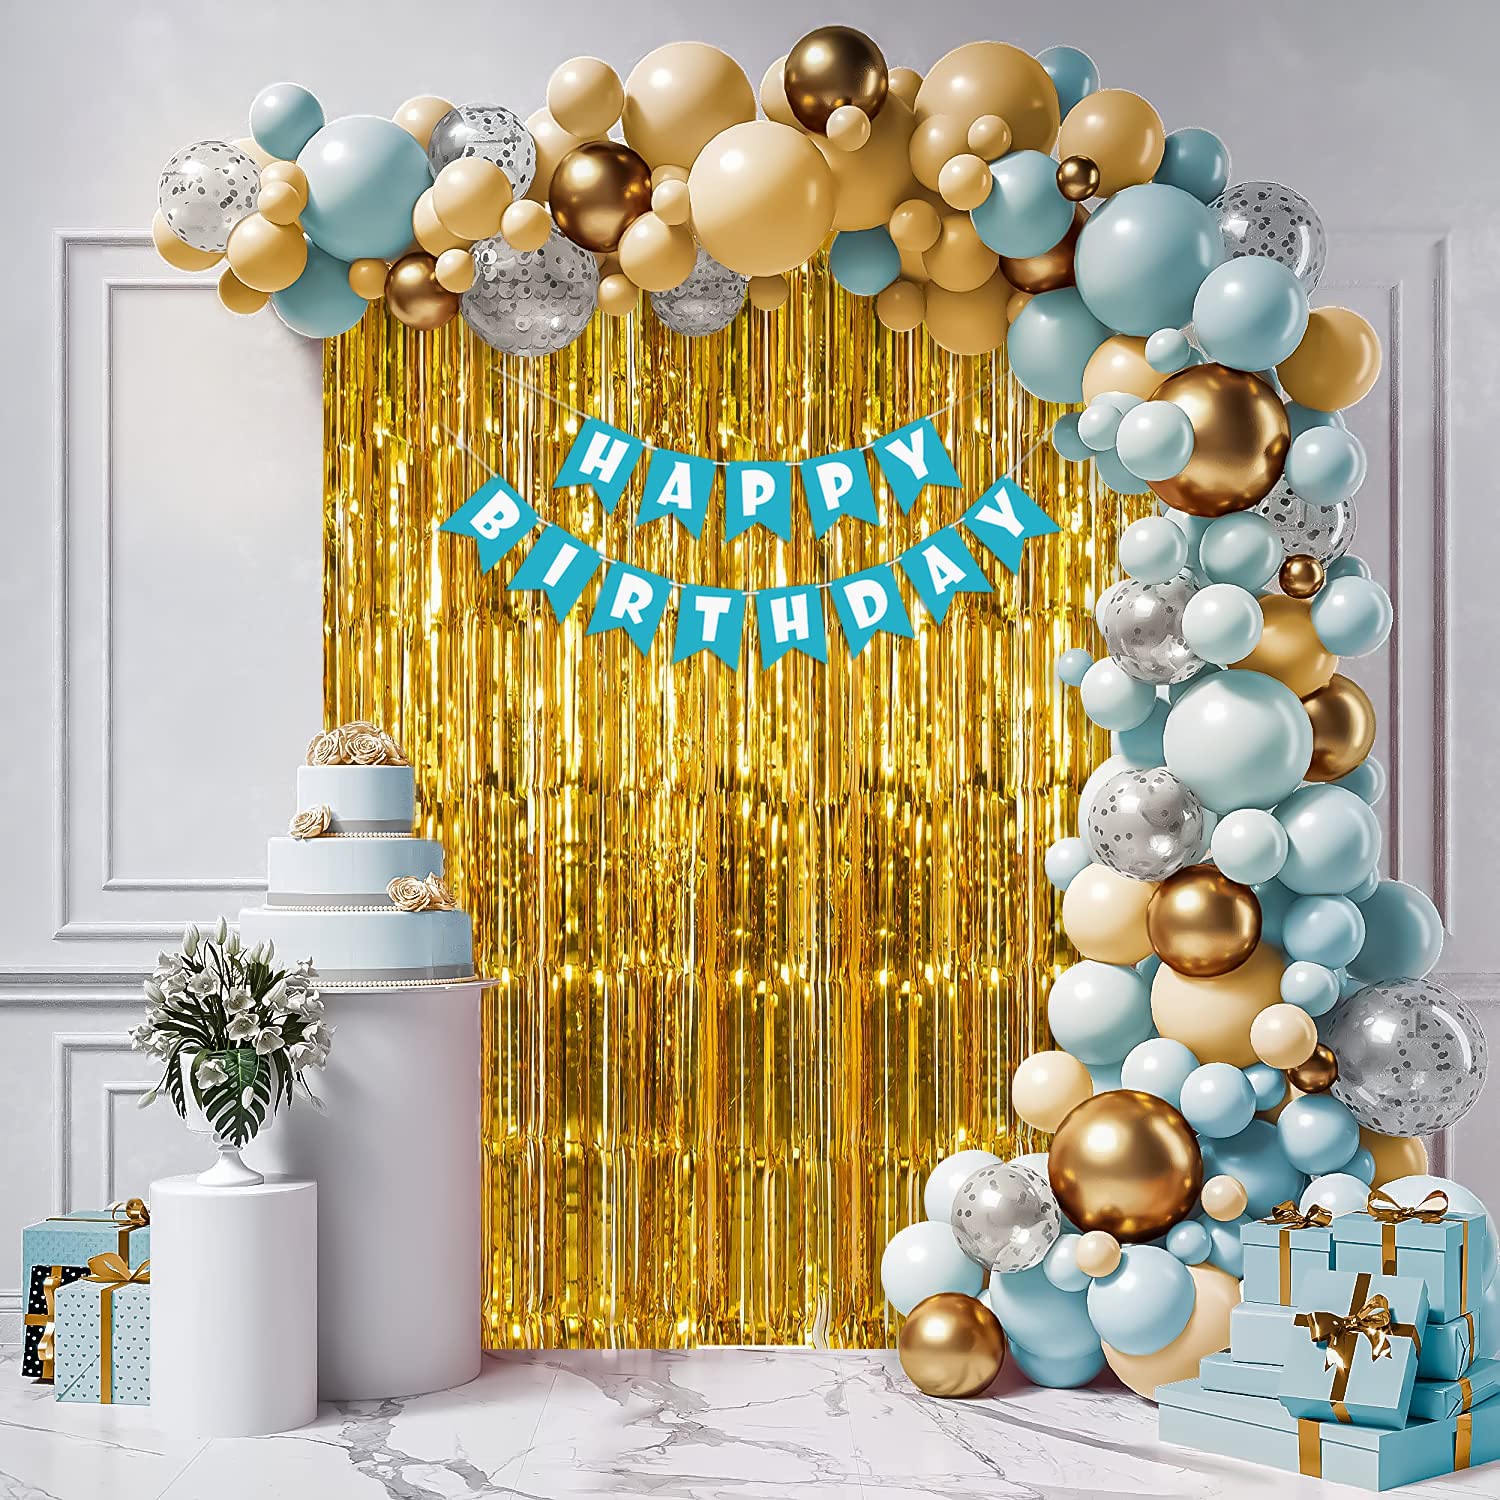 Blue and Peach birthday decoration items with fringe curtain